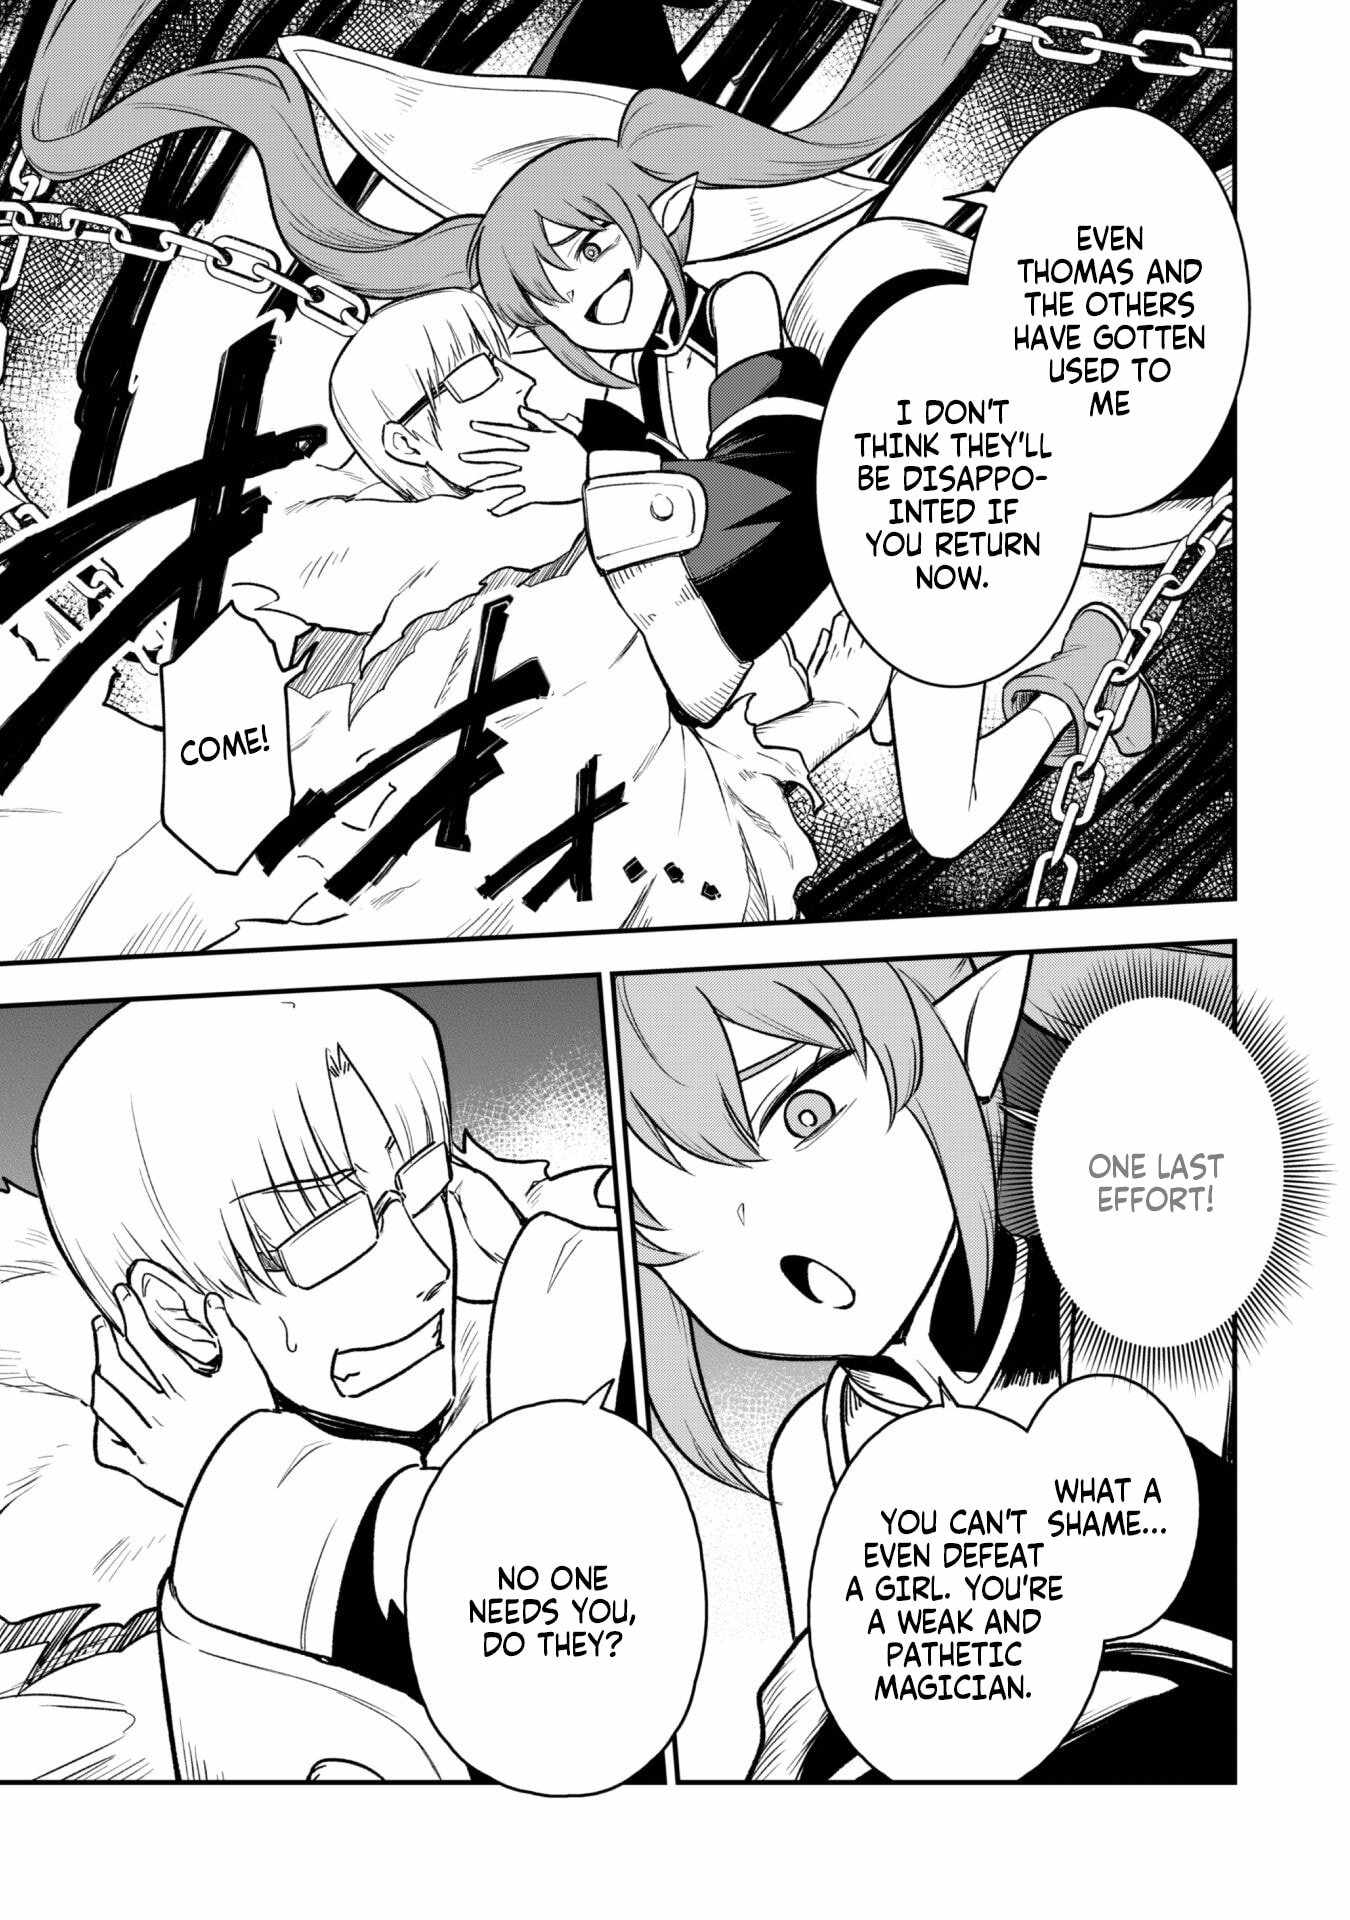 The White Mage Who Joined My Party Is a Circle Crusher, So My Isekai Life Is at Risk of Collapsing Once Again Chapter 12-1-eng-li - Page 6